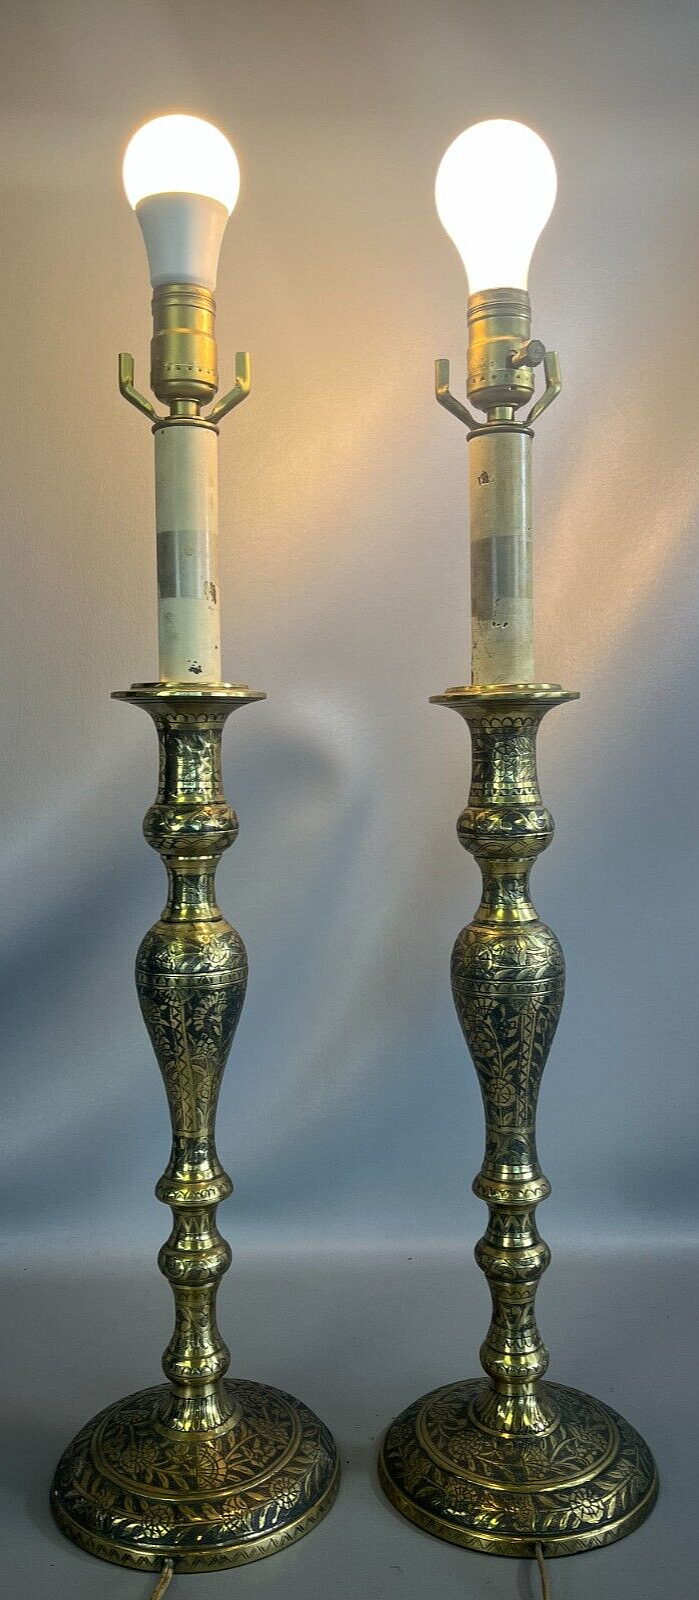 Pair of Vintage Brass MCM Table Lamps Tested